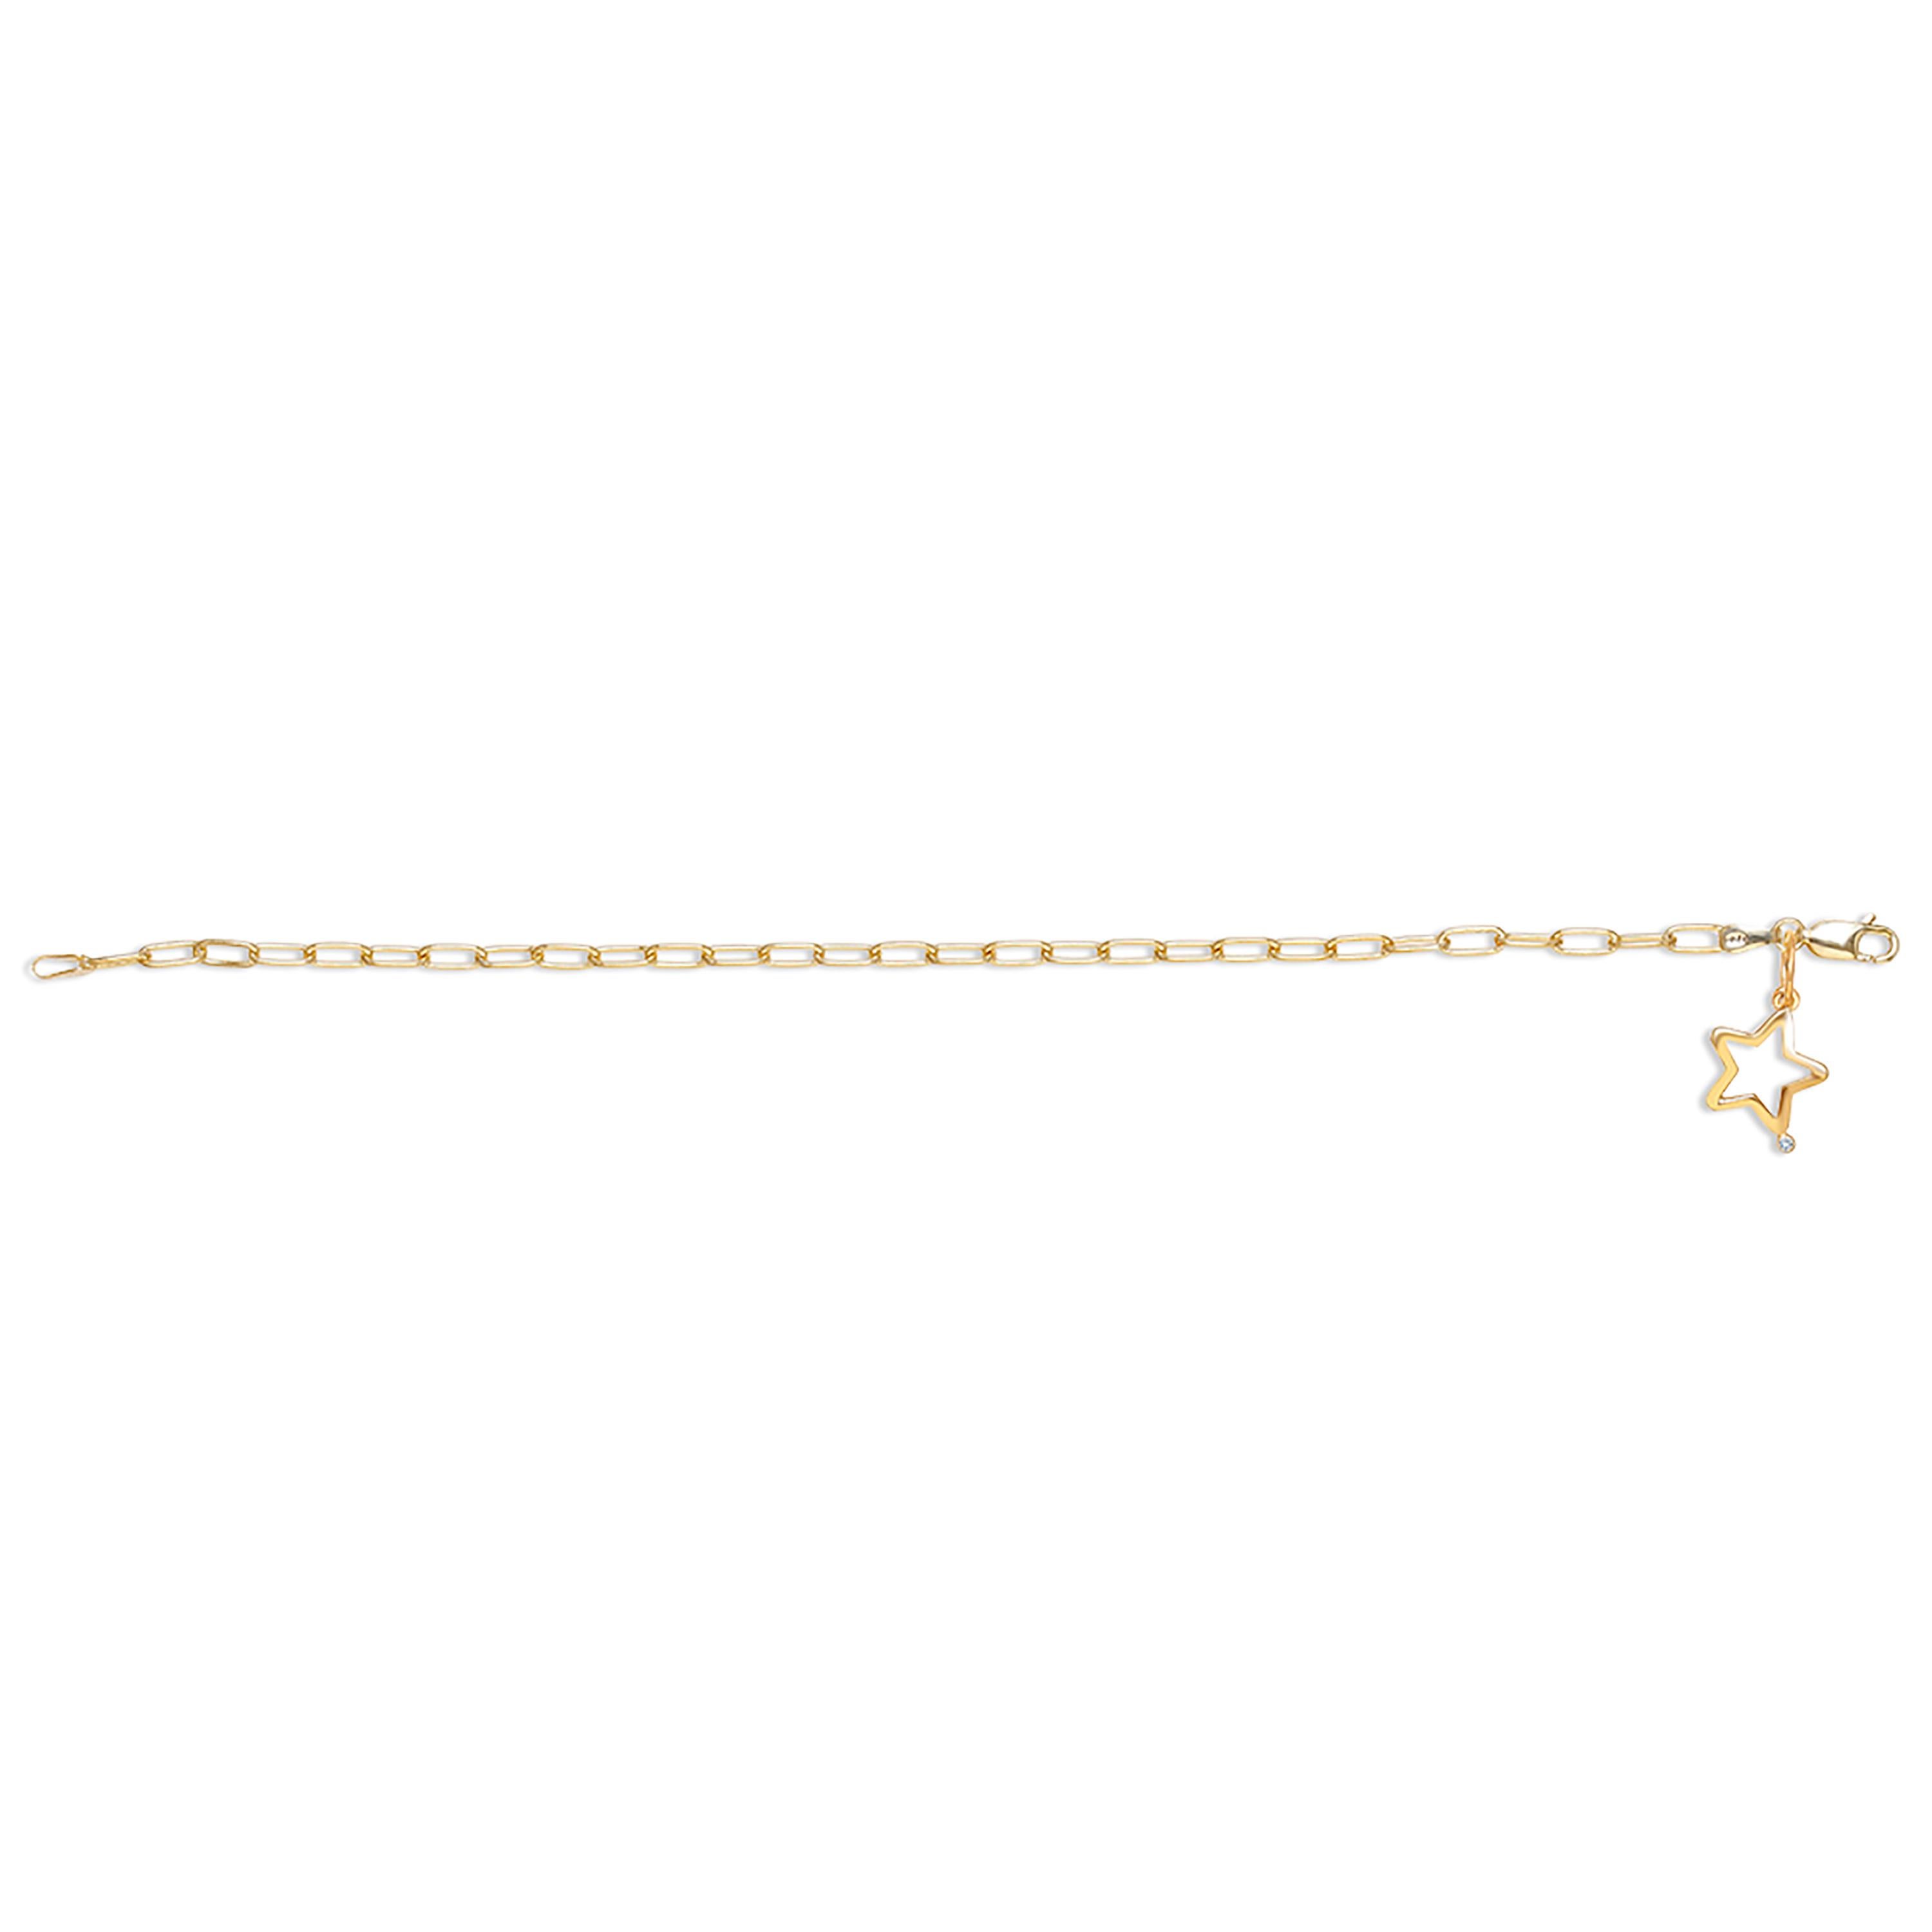 Sterling Silver paper clip link bracelet 
Star shape with genuine diamond charm 
Lobster claw clasp
One diamond weighing 0.02 carat 
Bracelet seven inches long 
New bracelet
Yellow gold plated 
